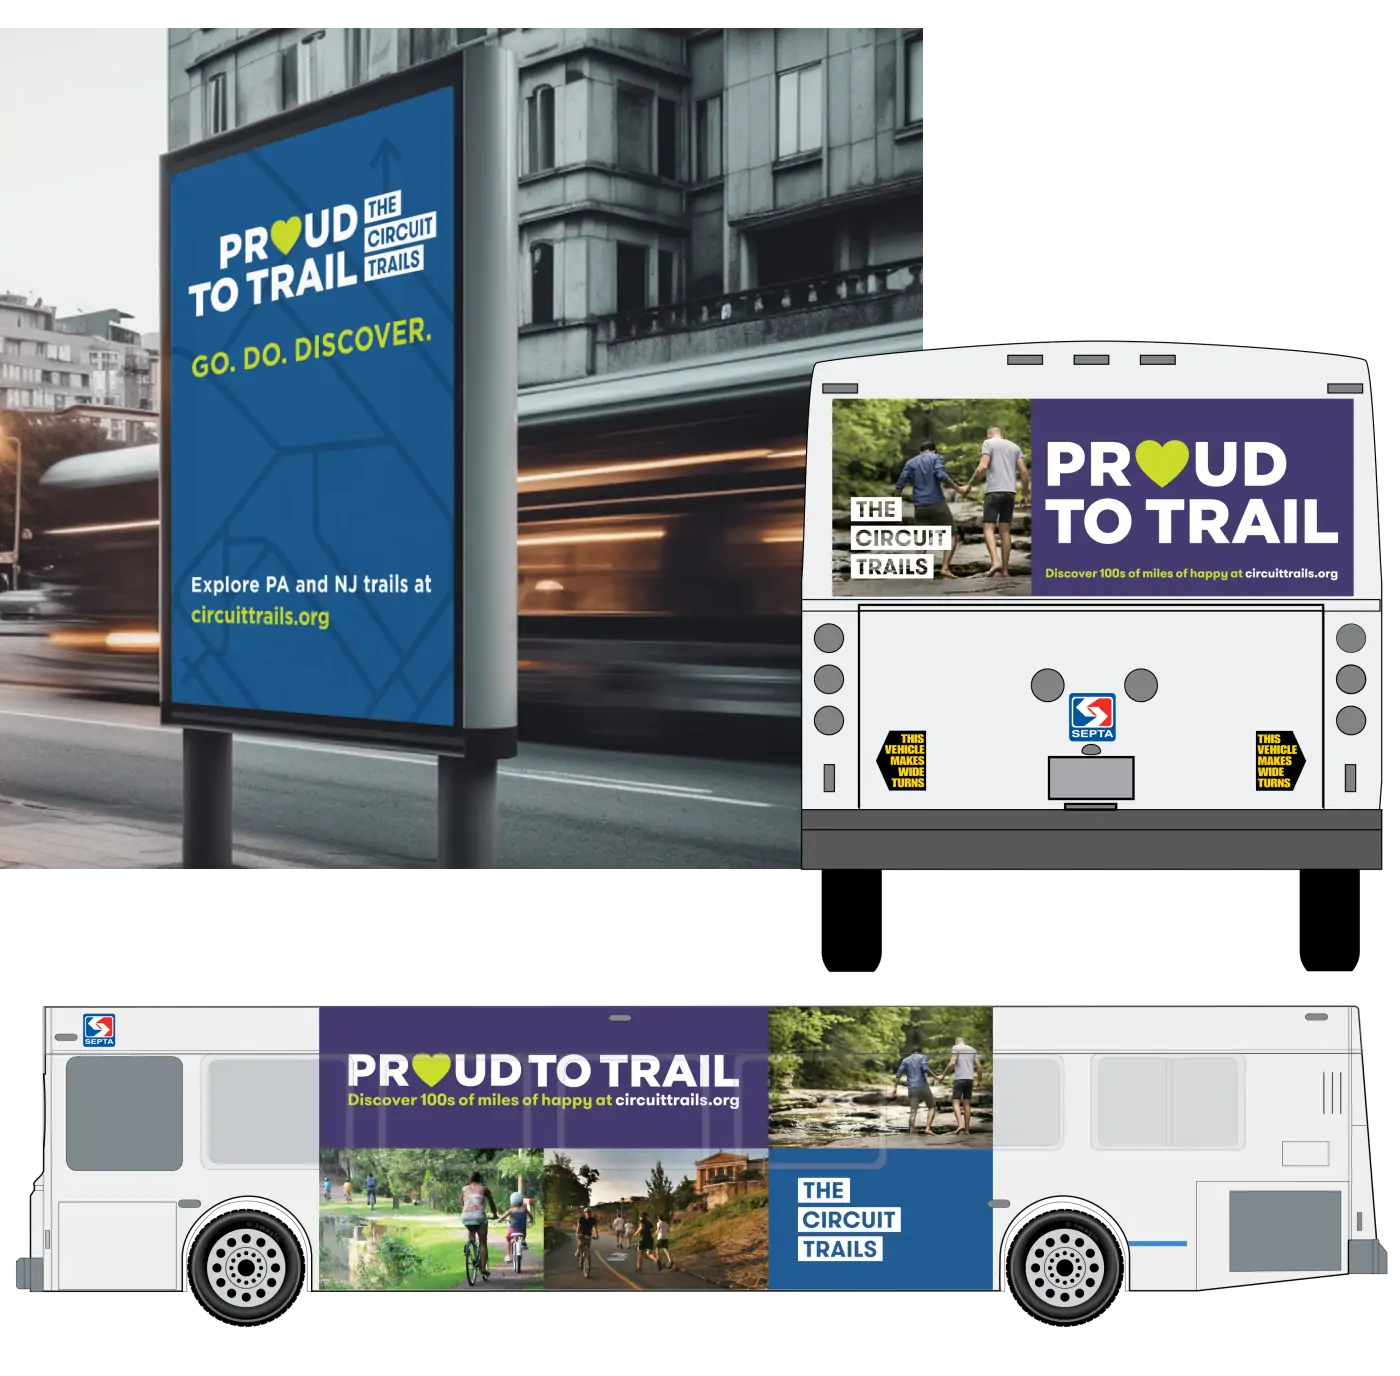 Bus Ads showing Circuit Trails Logo on the side and back of bus as well as bus stop ad.